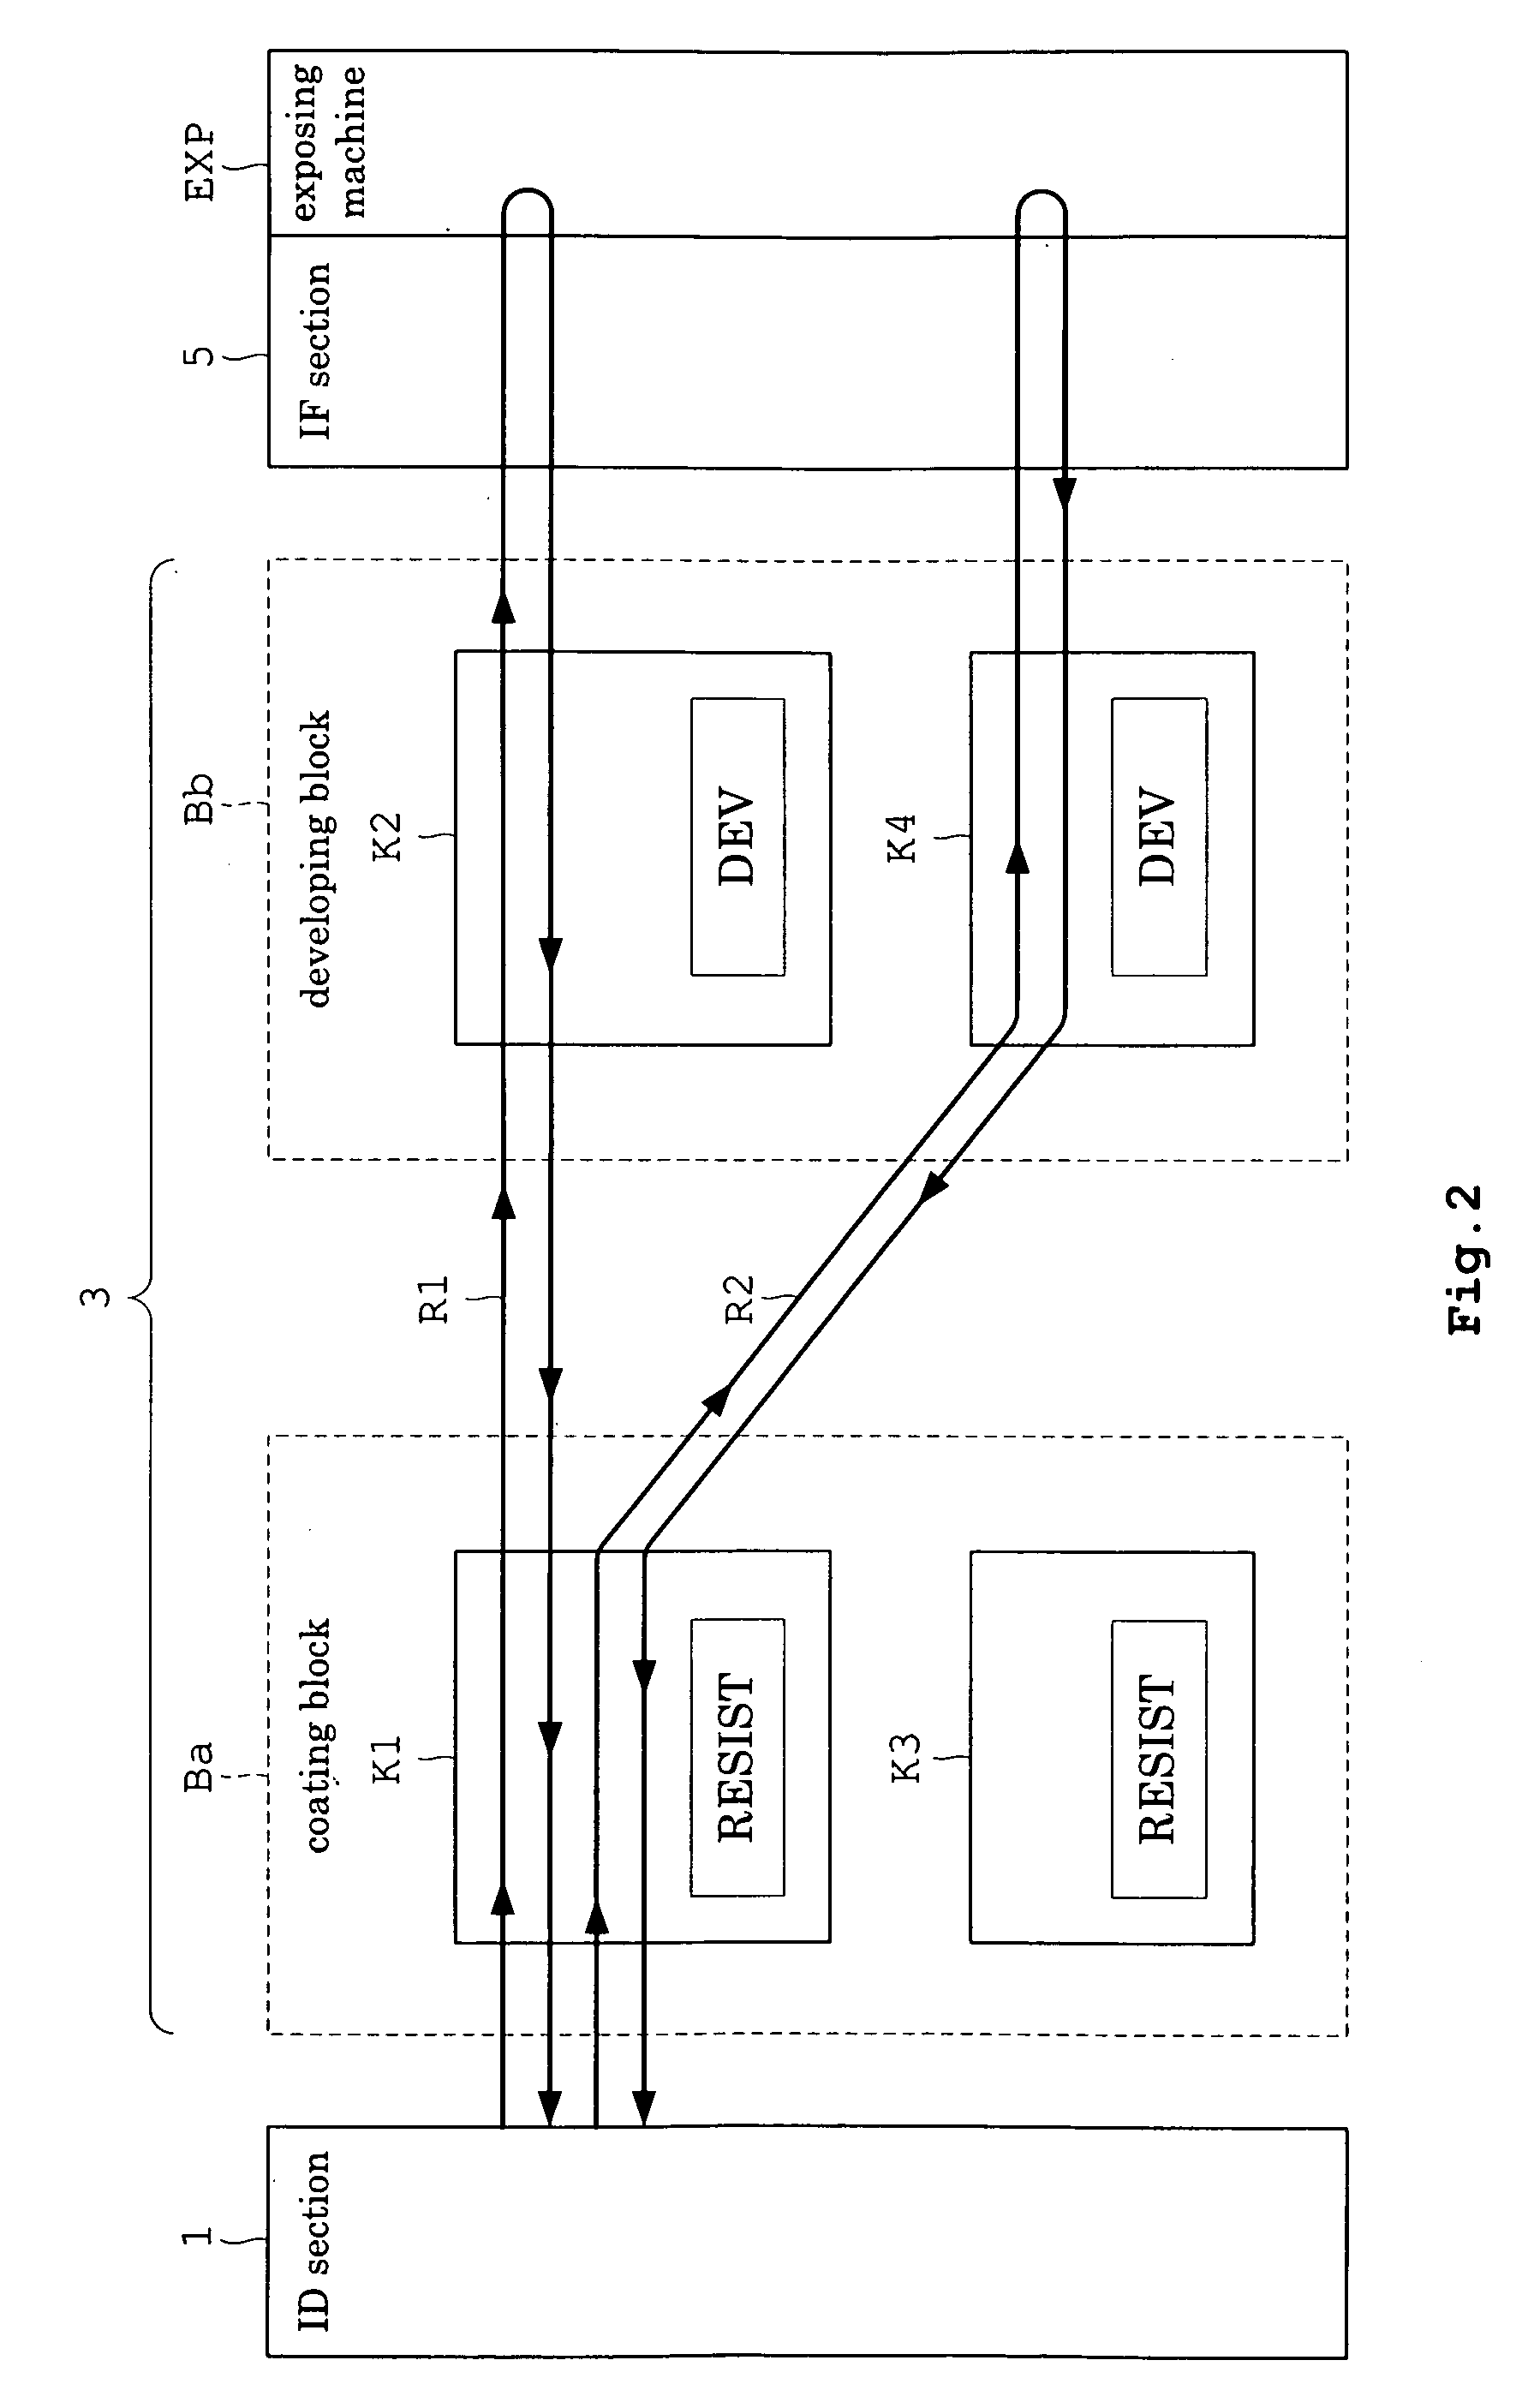 Multi-story substrate treating apparatus with flexible transport mechanisms